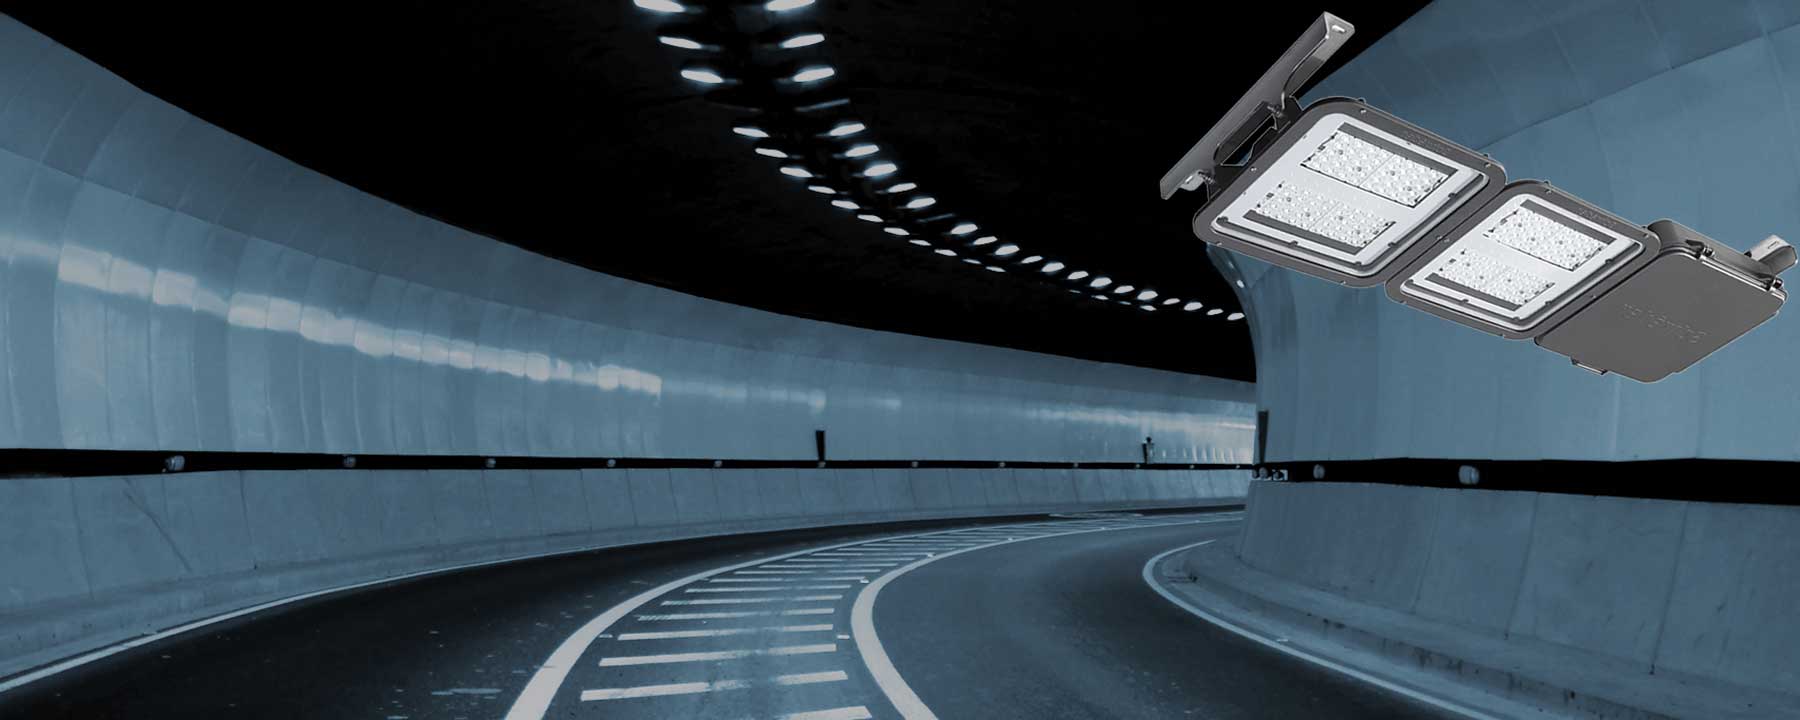 TLEX is the ultimate platform for safe, efficient and sustainable tunnels